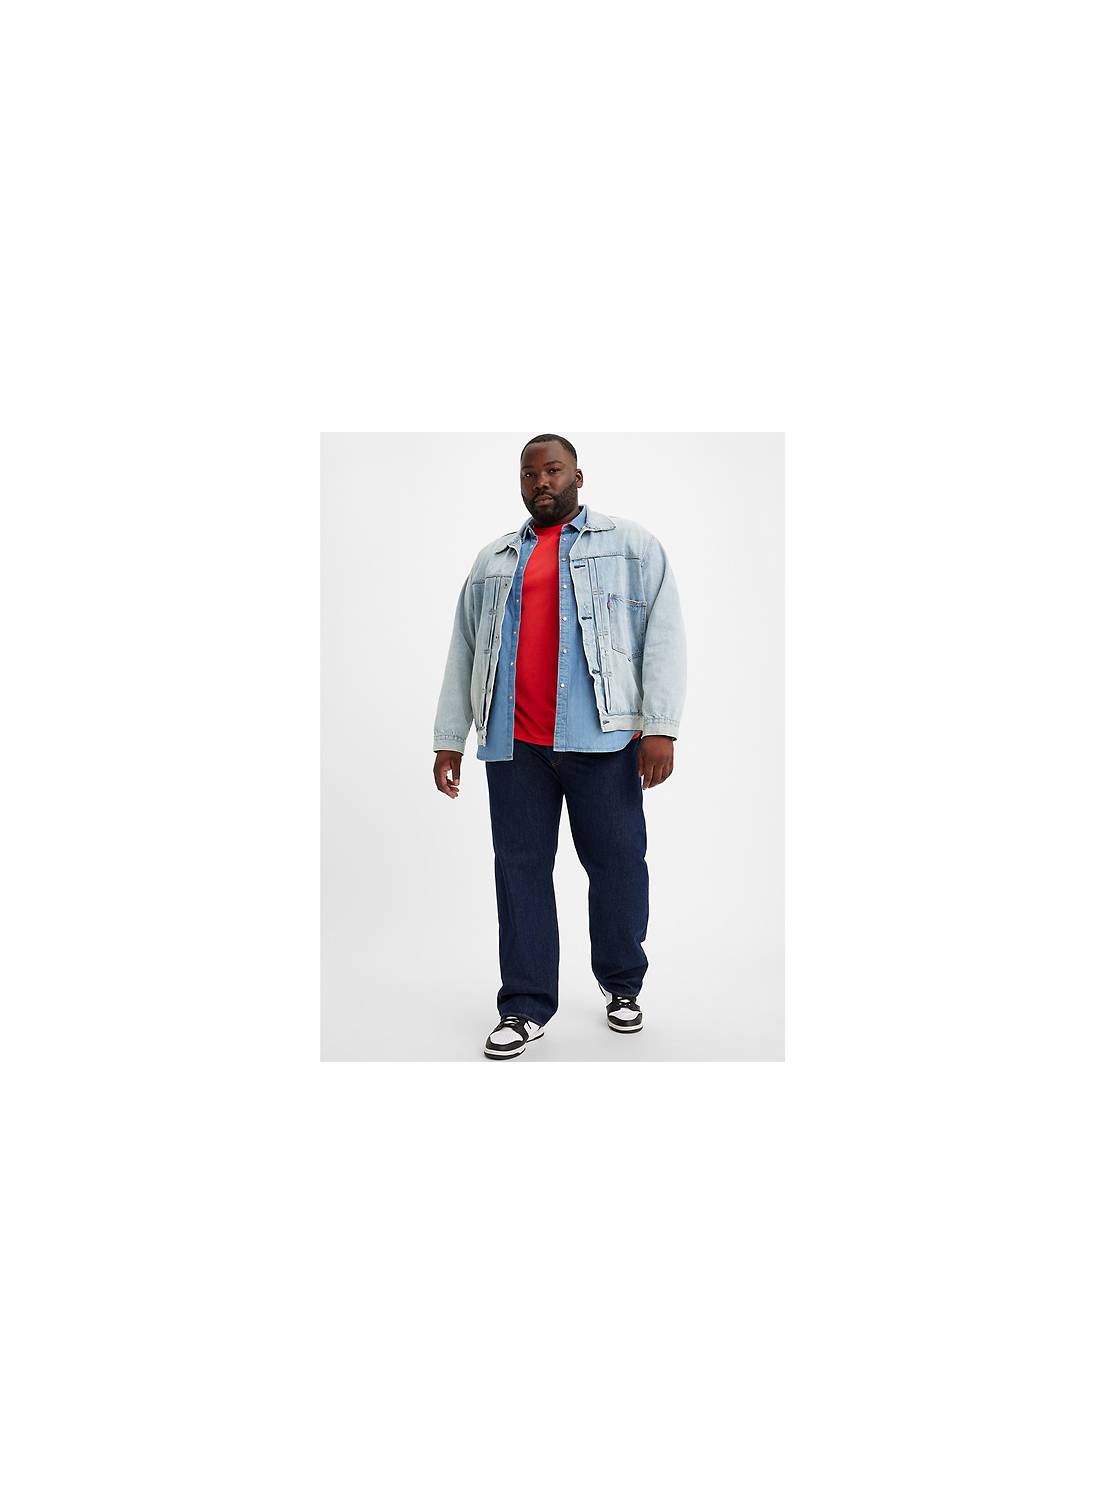 Big and Tall Men's Clothing, Big and Tall Jeans